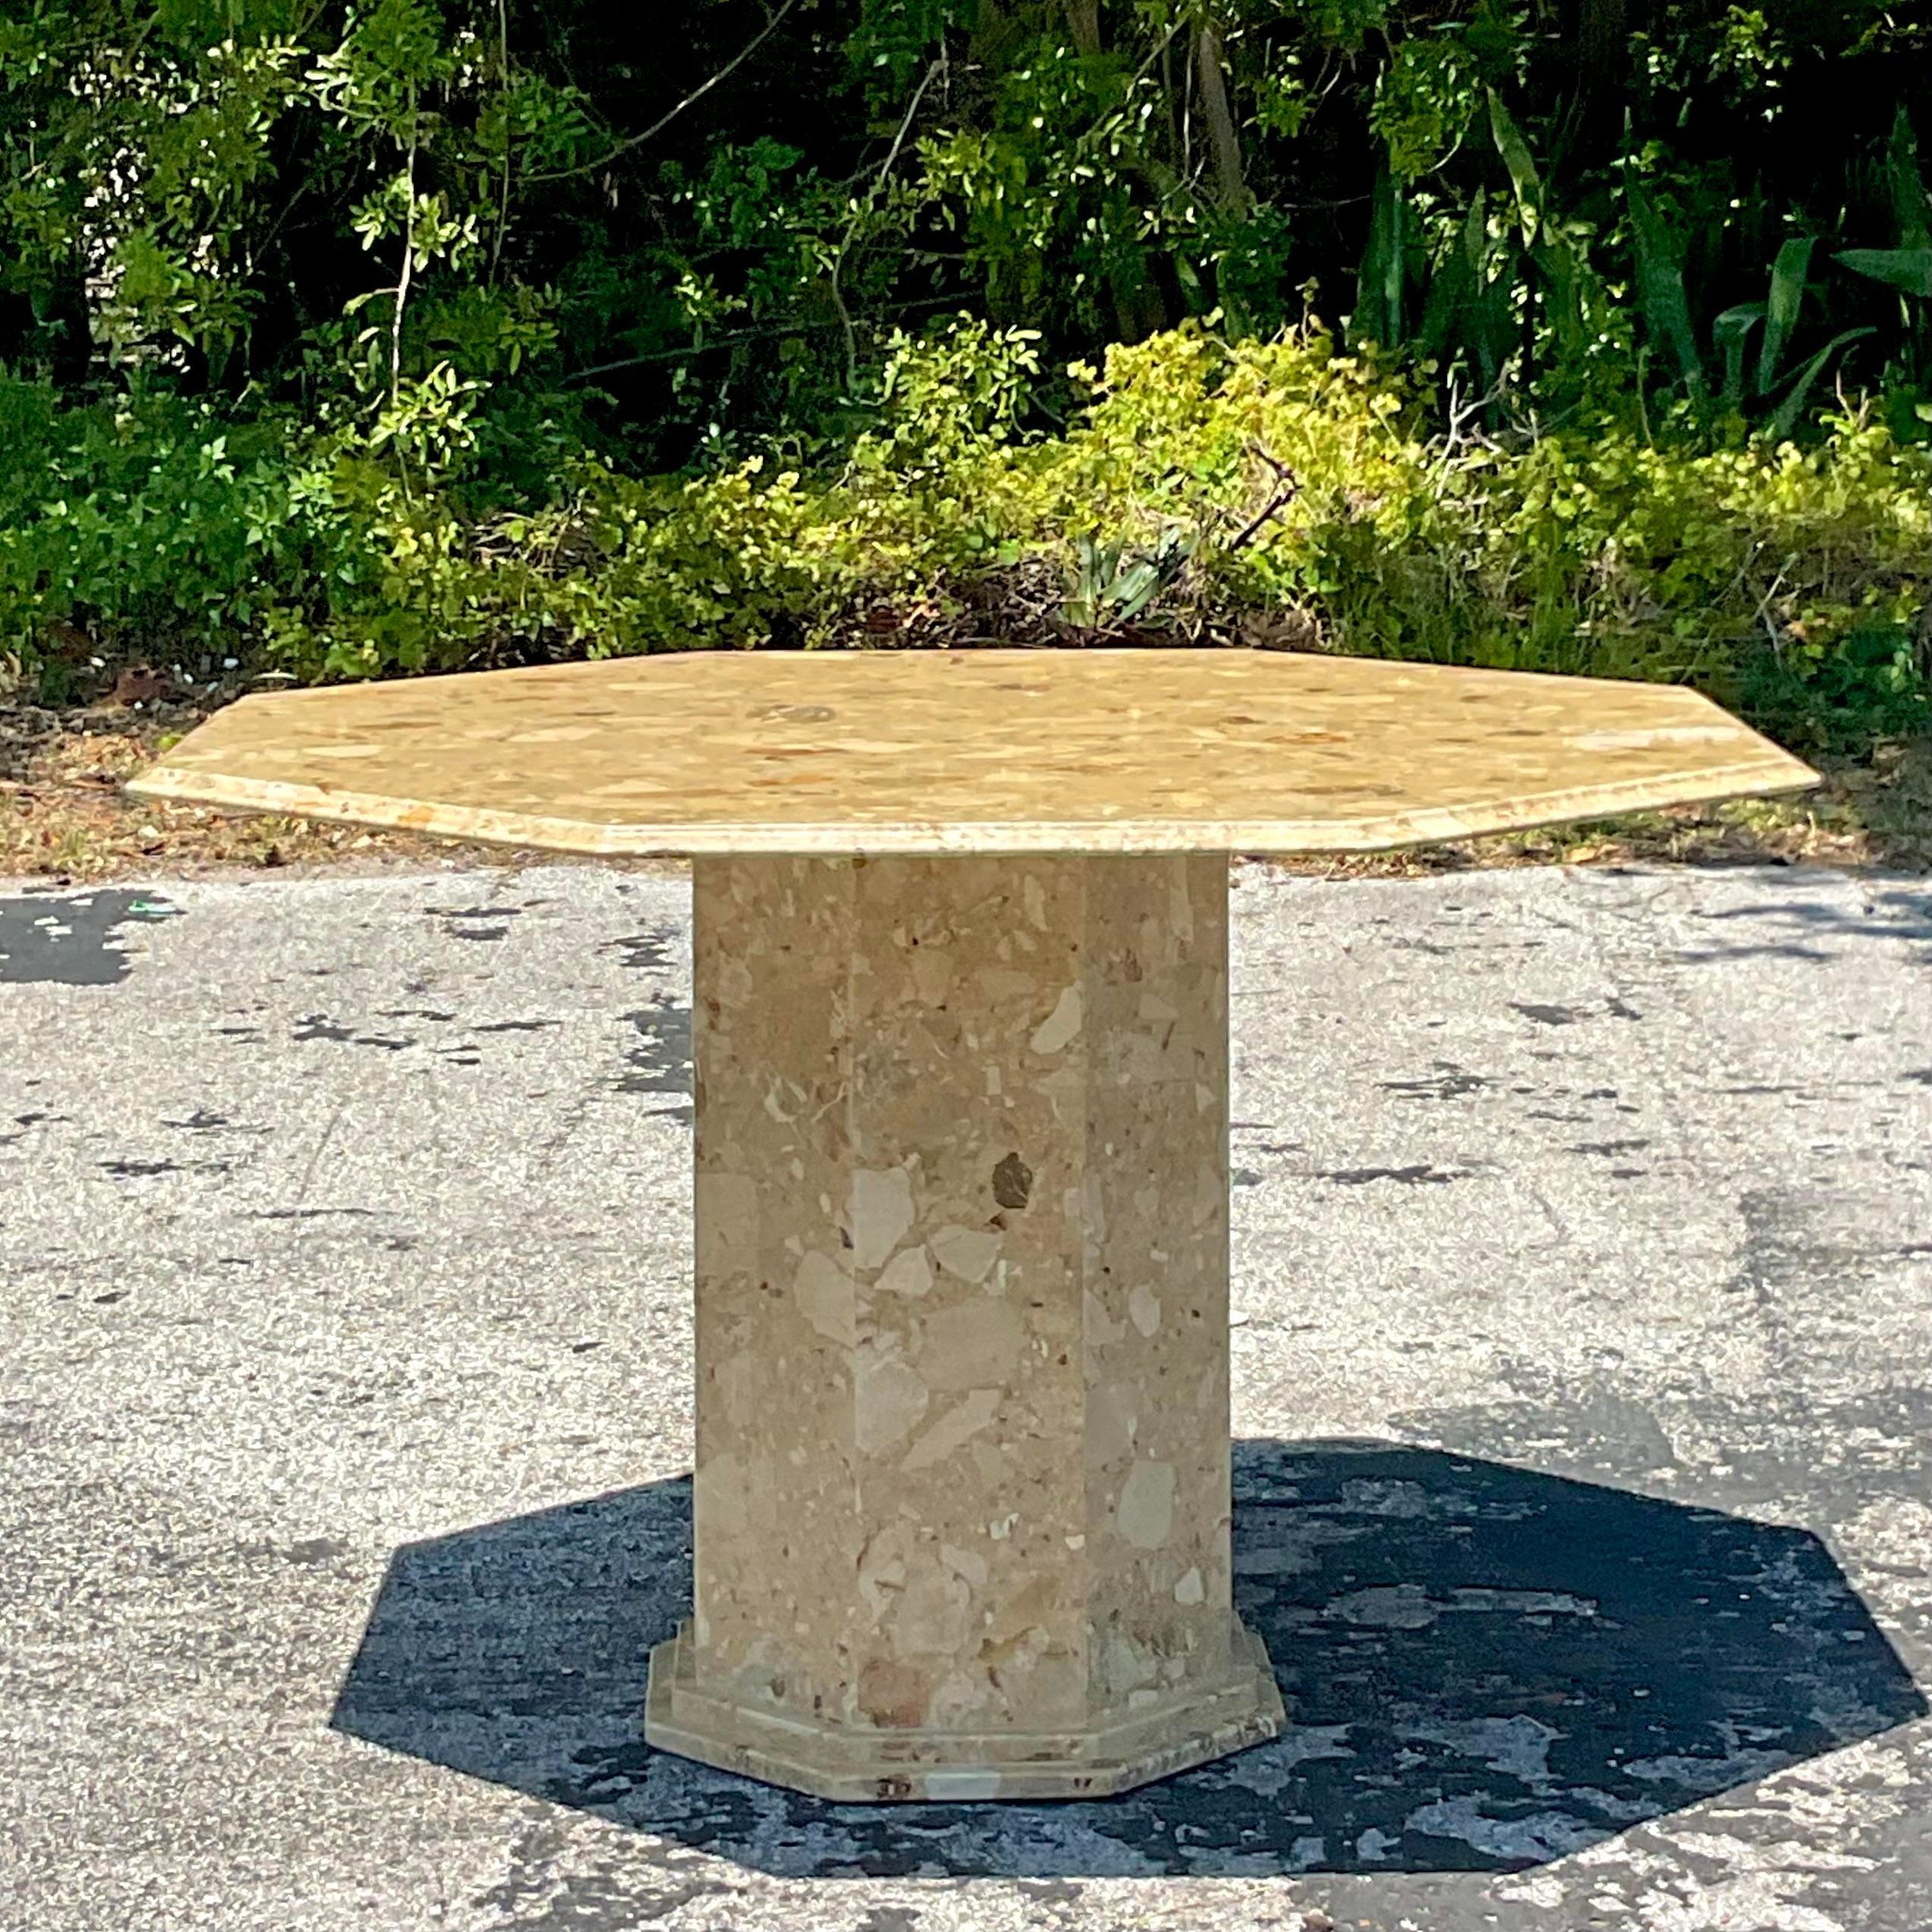 Romanesque Elegance: The Vintage Italian Octagon Stone Dining Table merges Old World grandeur with American sensibility. Crafted from exquisite stone, it becomes a centerpiece that speaks to the enduring allure of classical design while fitting